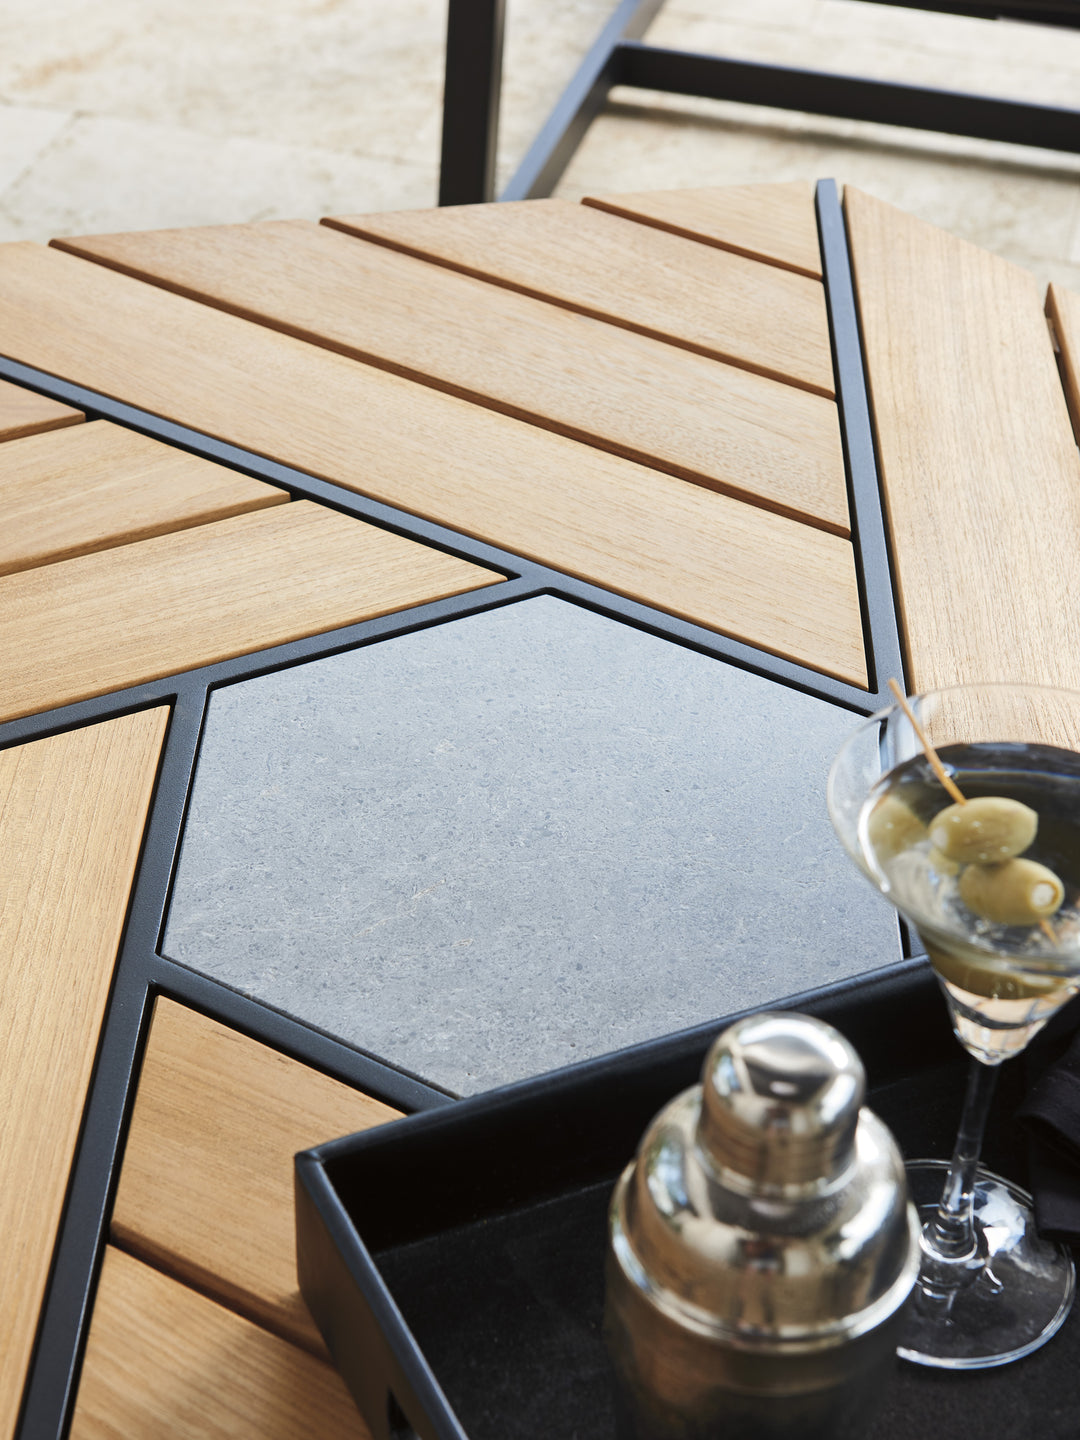 American Home Furniture | Tommy Bahama Outdoor  - South Beach Hexagonal Cocktail Table